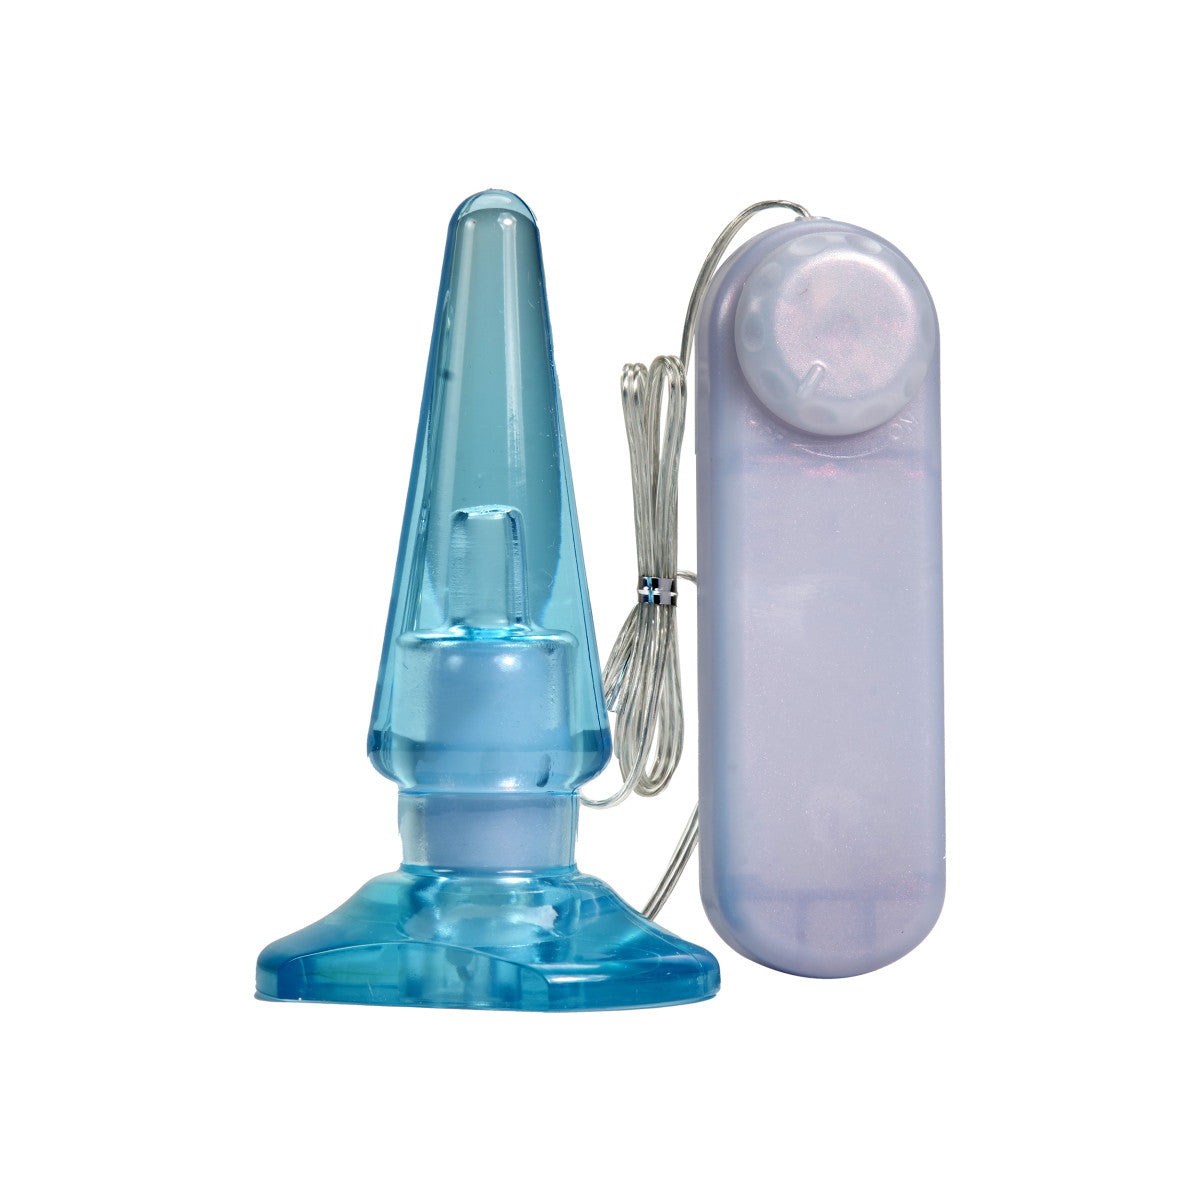 Blue translucent classic shaped butt plug with a tapered tip, slimmer neck and flared base. Features an opening at the bottom that fits the included wired egg shaped bullet. Twist dial on controller adjusts intensity. Additional images show alternate angles.